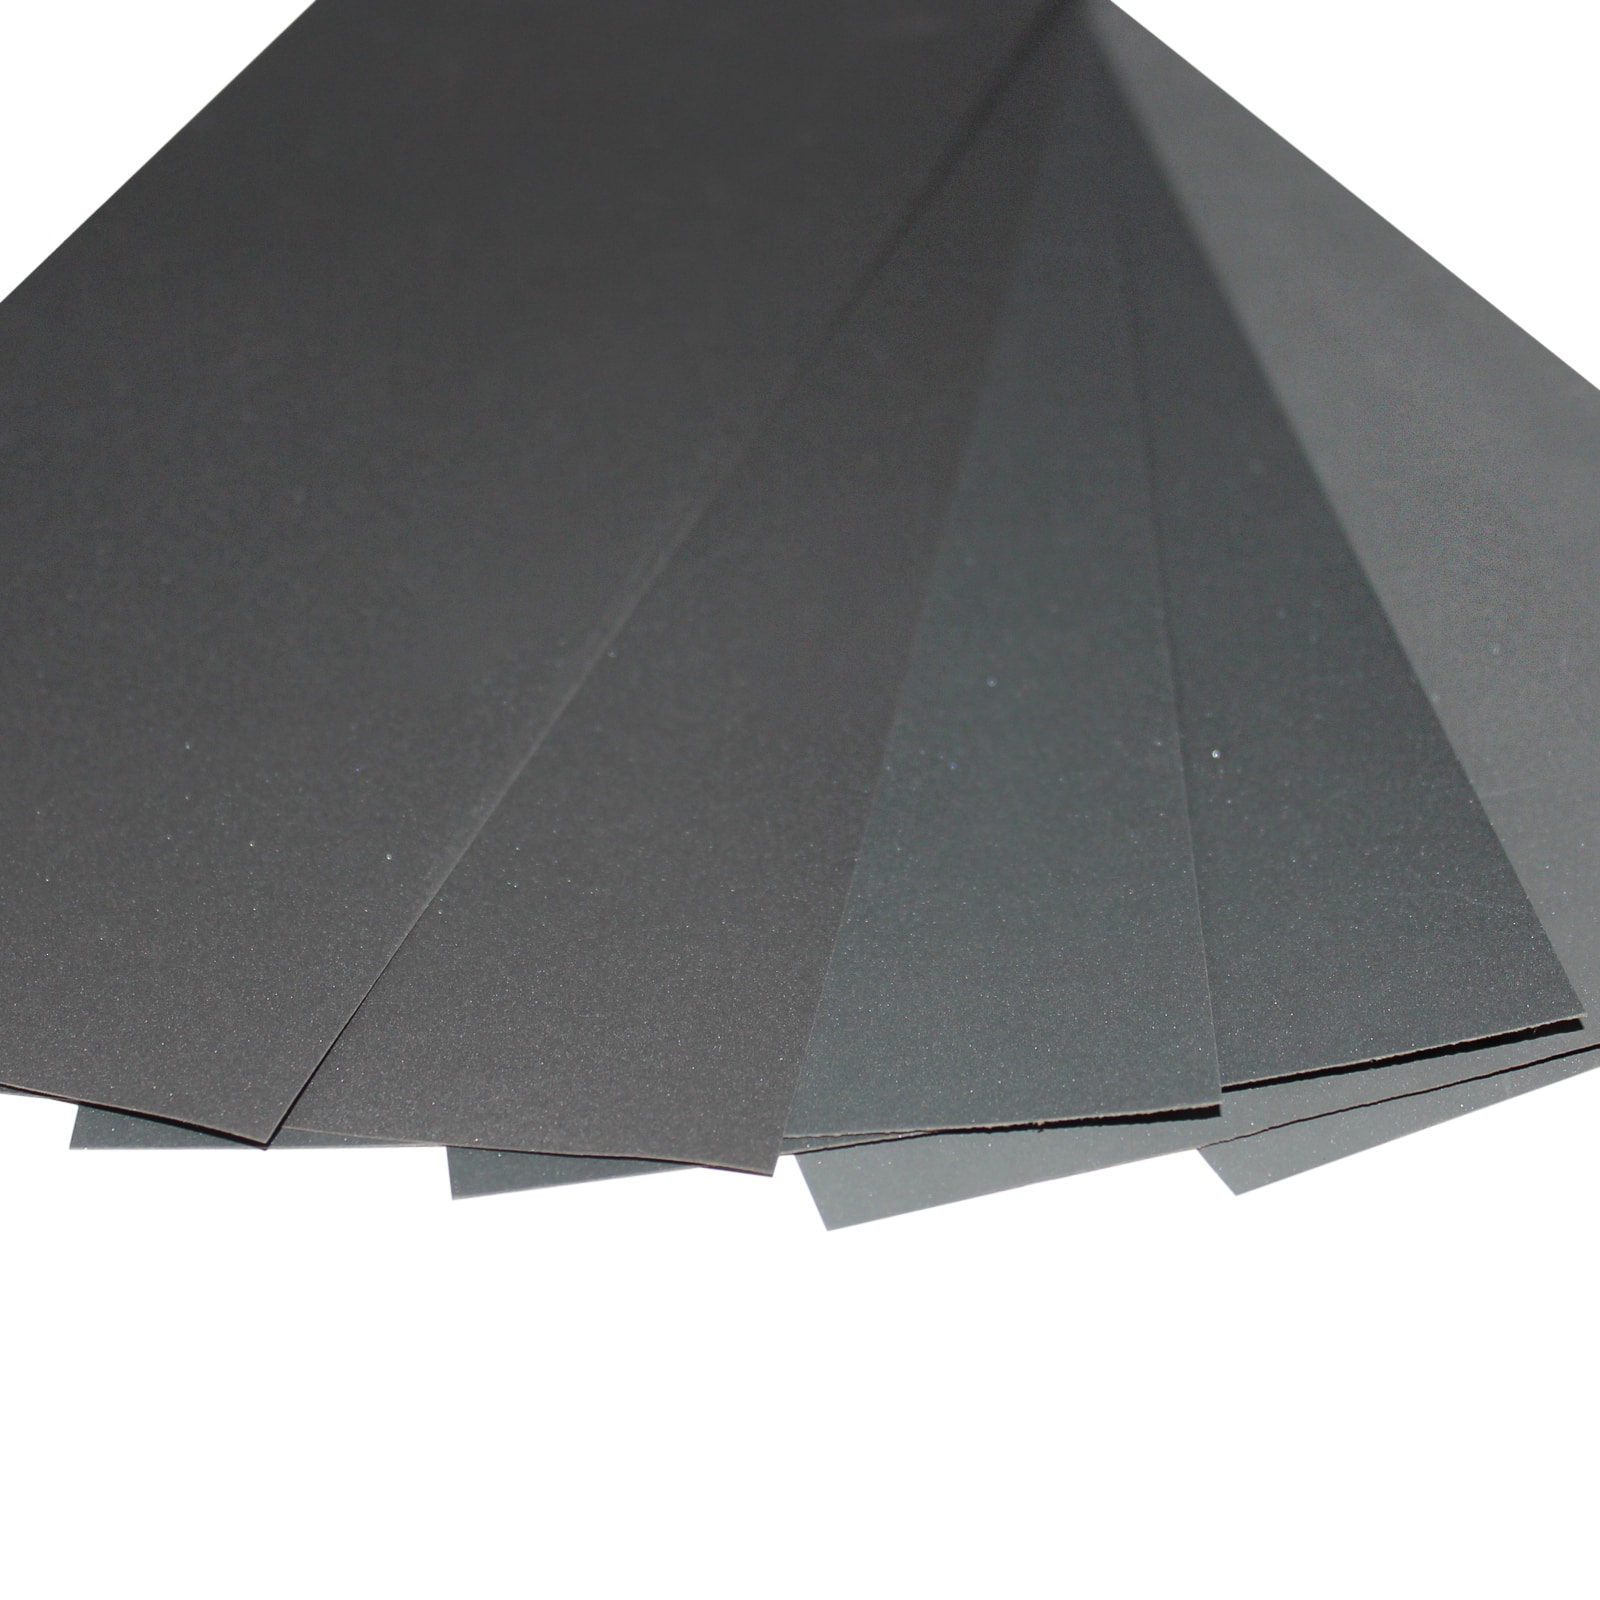 12 Packs: 6 ct. (72 total) Fine Grit Sandpaper Sheets by Craft Smart&#xAE;, 3.5&#x22; x 9&#x22;